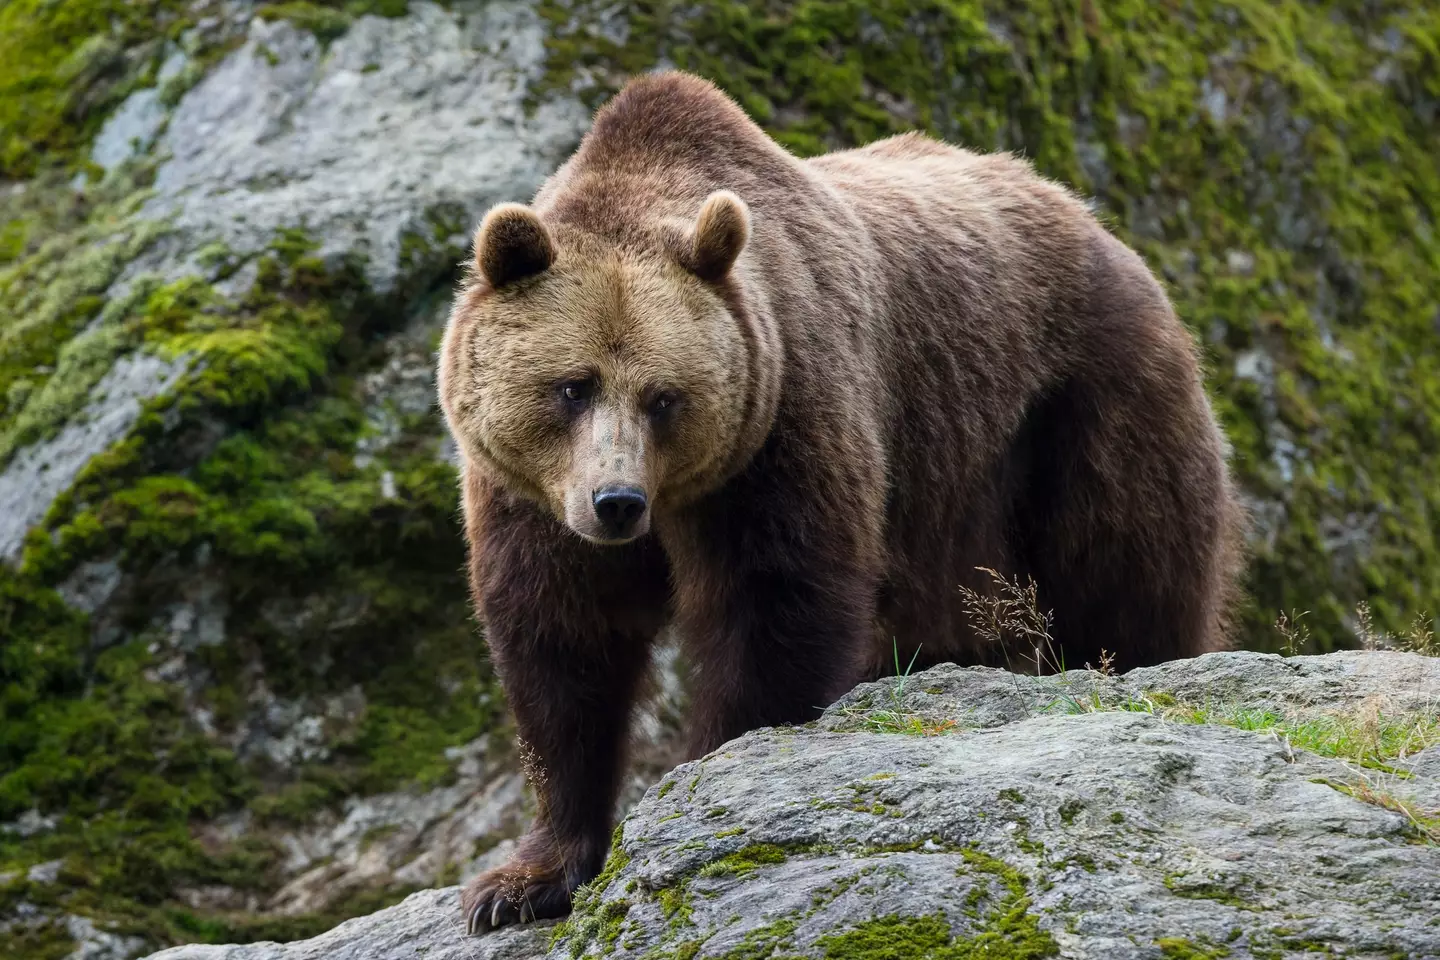 It's believe a brown bear killed the couple. (Getty stock photo)